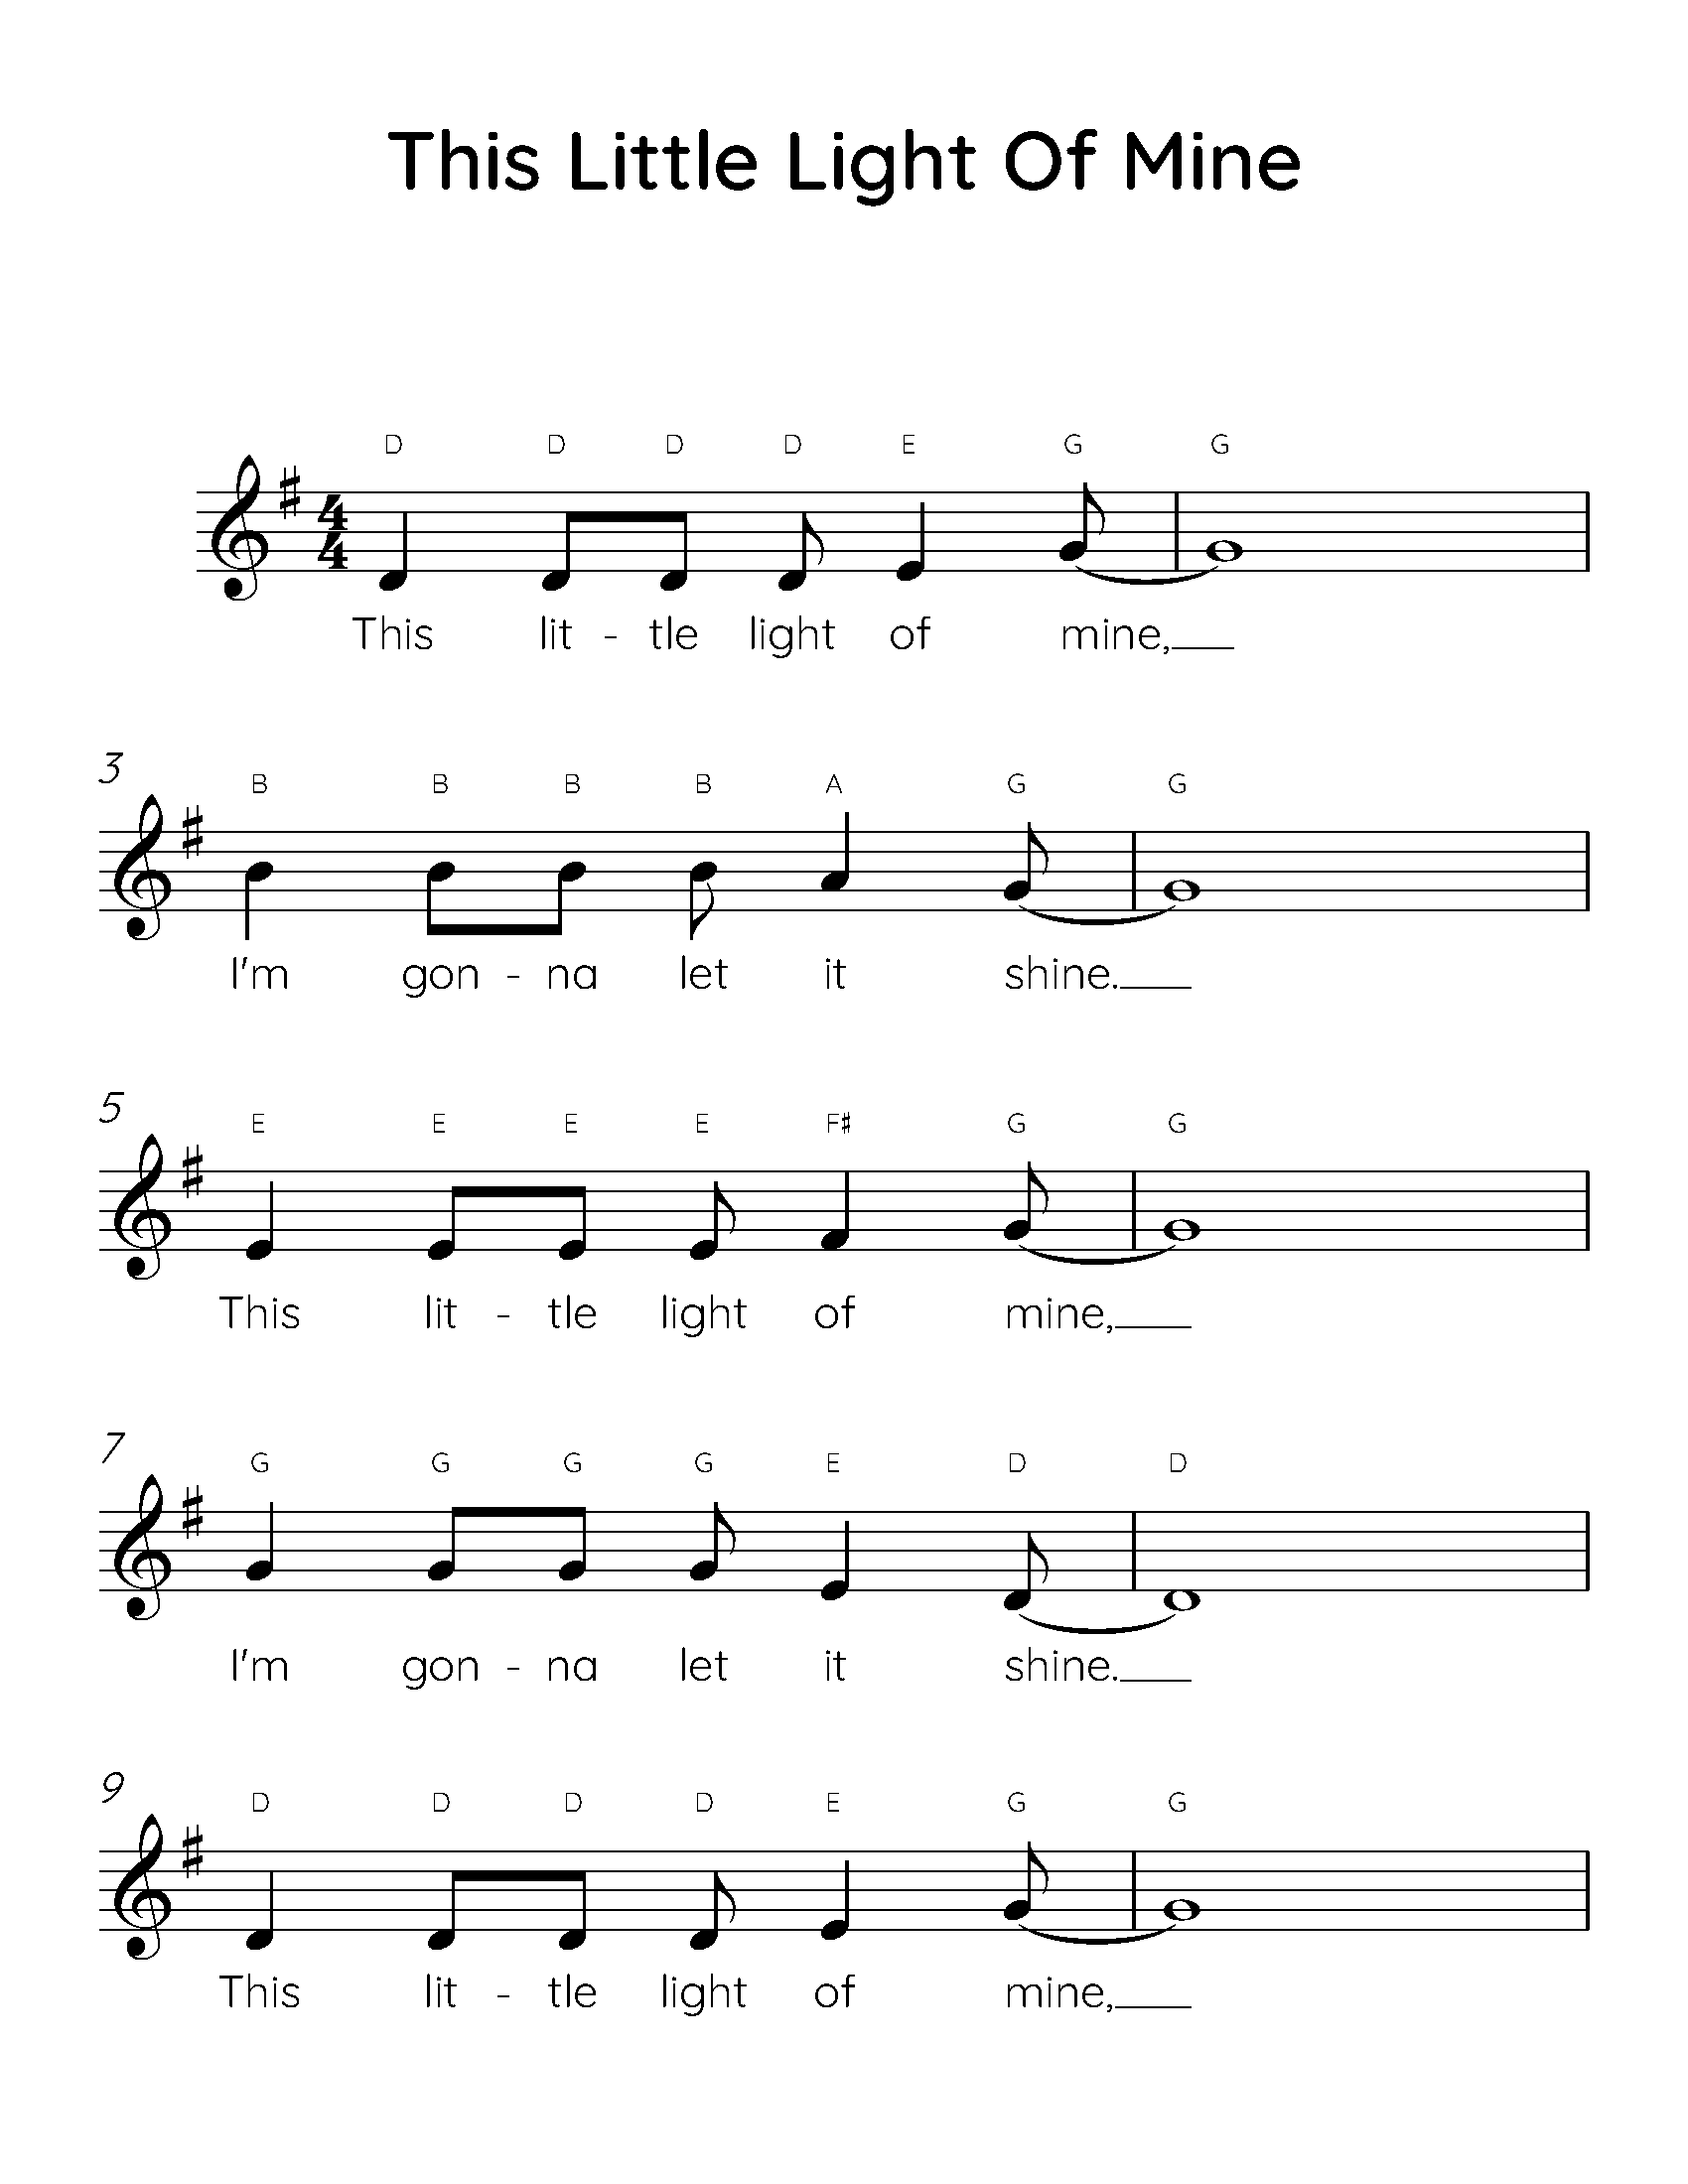 This Little Light of Mine Easy Piano Sheet Music